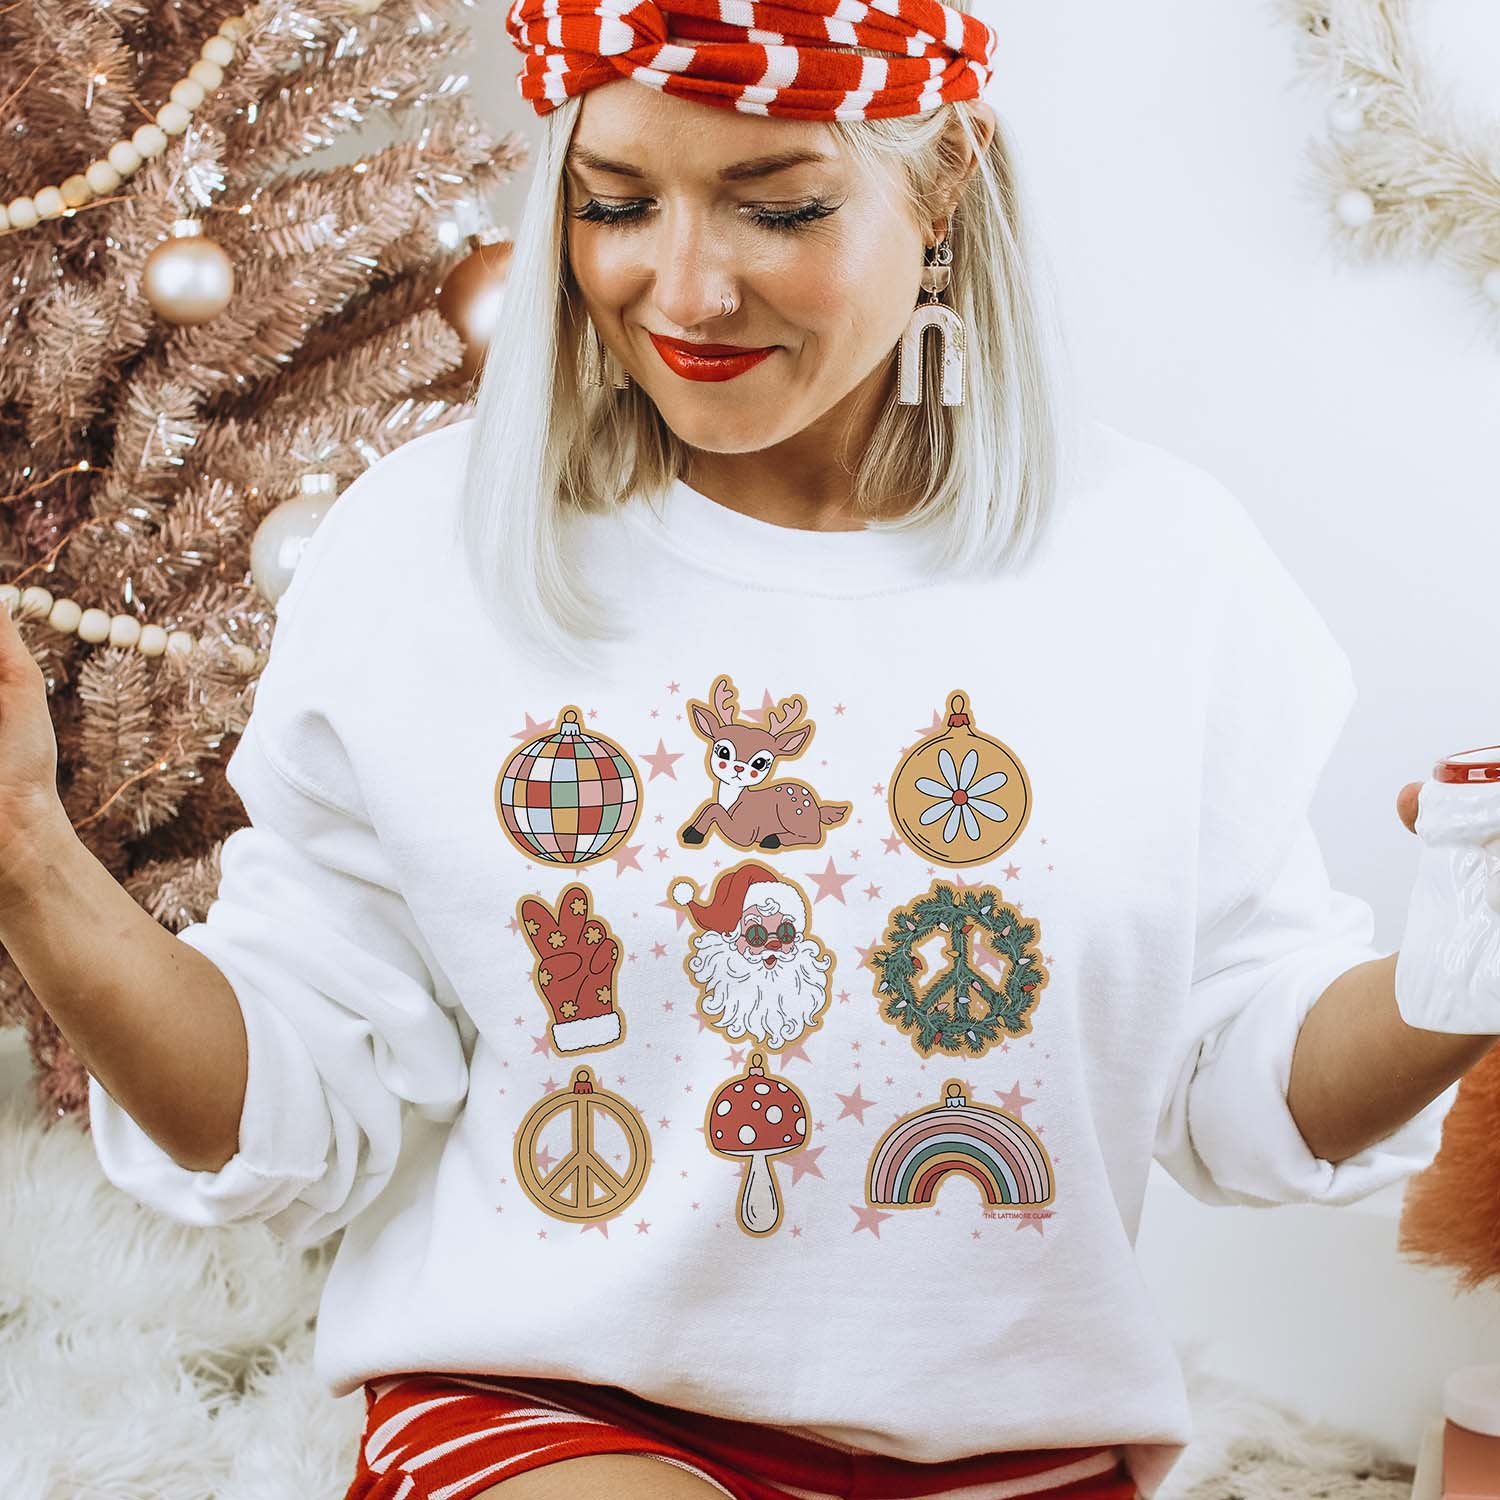 This white sweatshirt is being modeled with the sleeves pushed up and a red and white striped headband and matching shorts. The sweatshirt has 9 groovy and festive hand drawn Christmas artwork, such as a disco ball, reindeer, ornament, Santa Clause, and more! The background behind the model is white and a brown Christmas tree is over her right shoulder. She is also wearing white dangle earrings to complete the look. 